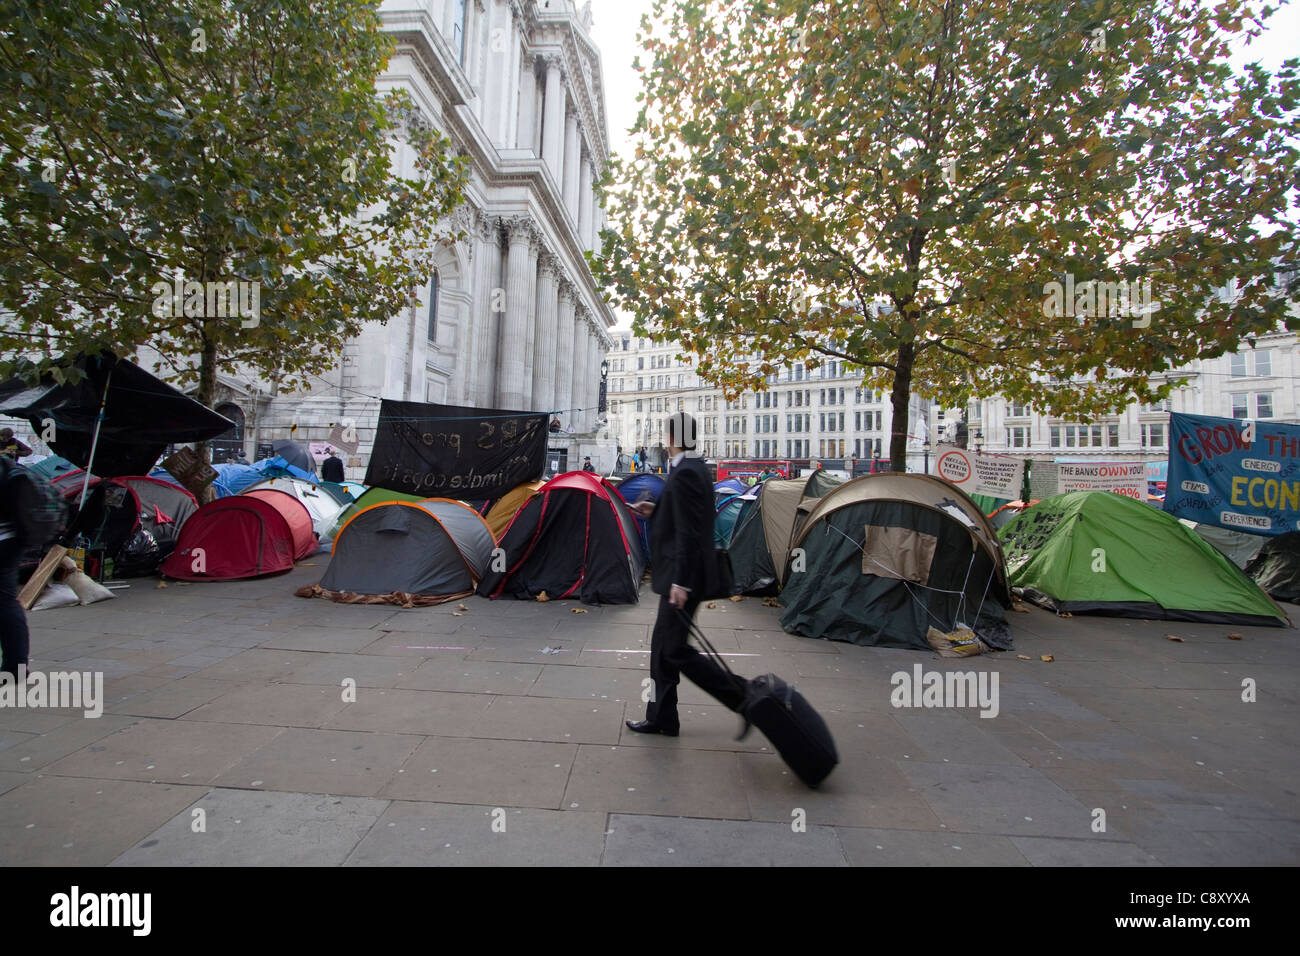 occupy london protesters saint pauls st pauls camping in tent city with city workers walking past Stock Photo